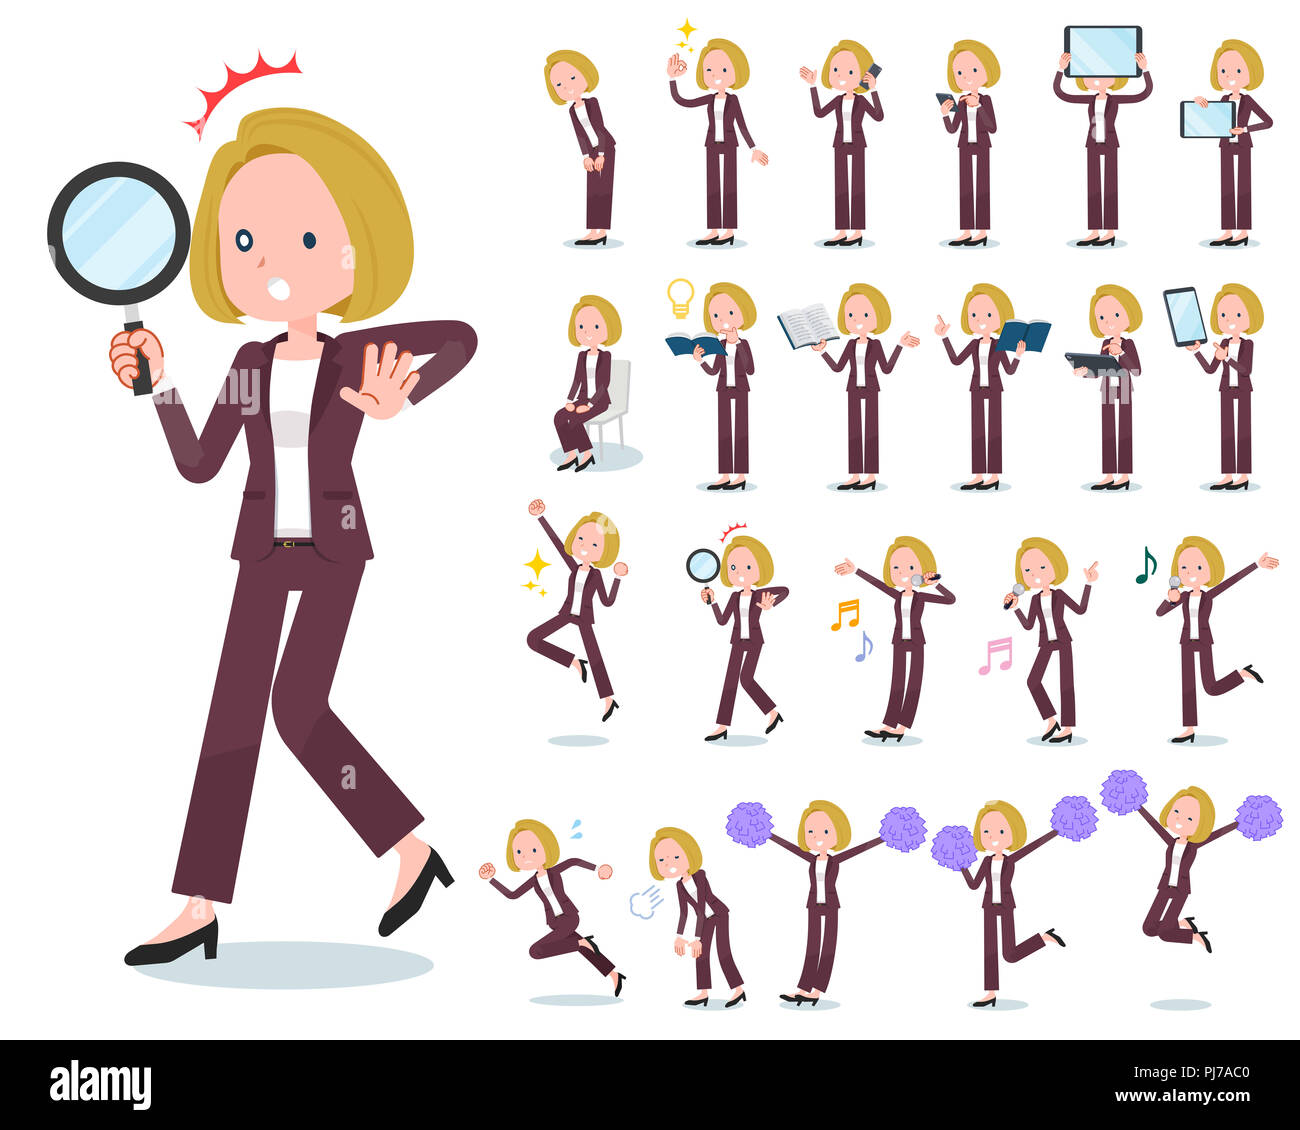 A set of women with digital equipment such as smartphones.There are actions that express emotions.It's vector art so it's easy to edit. Stock Photo